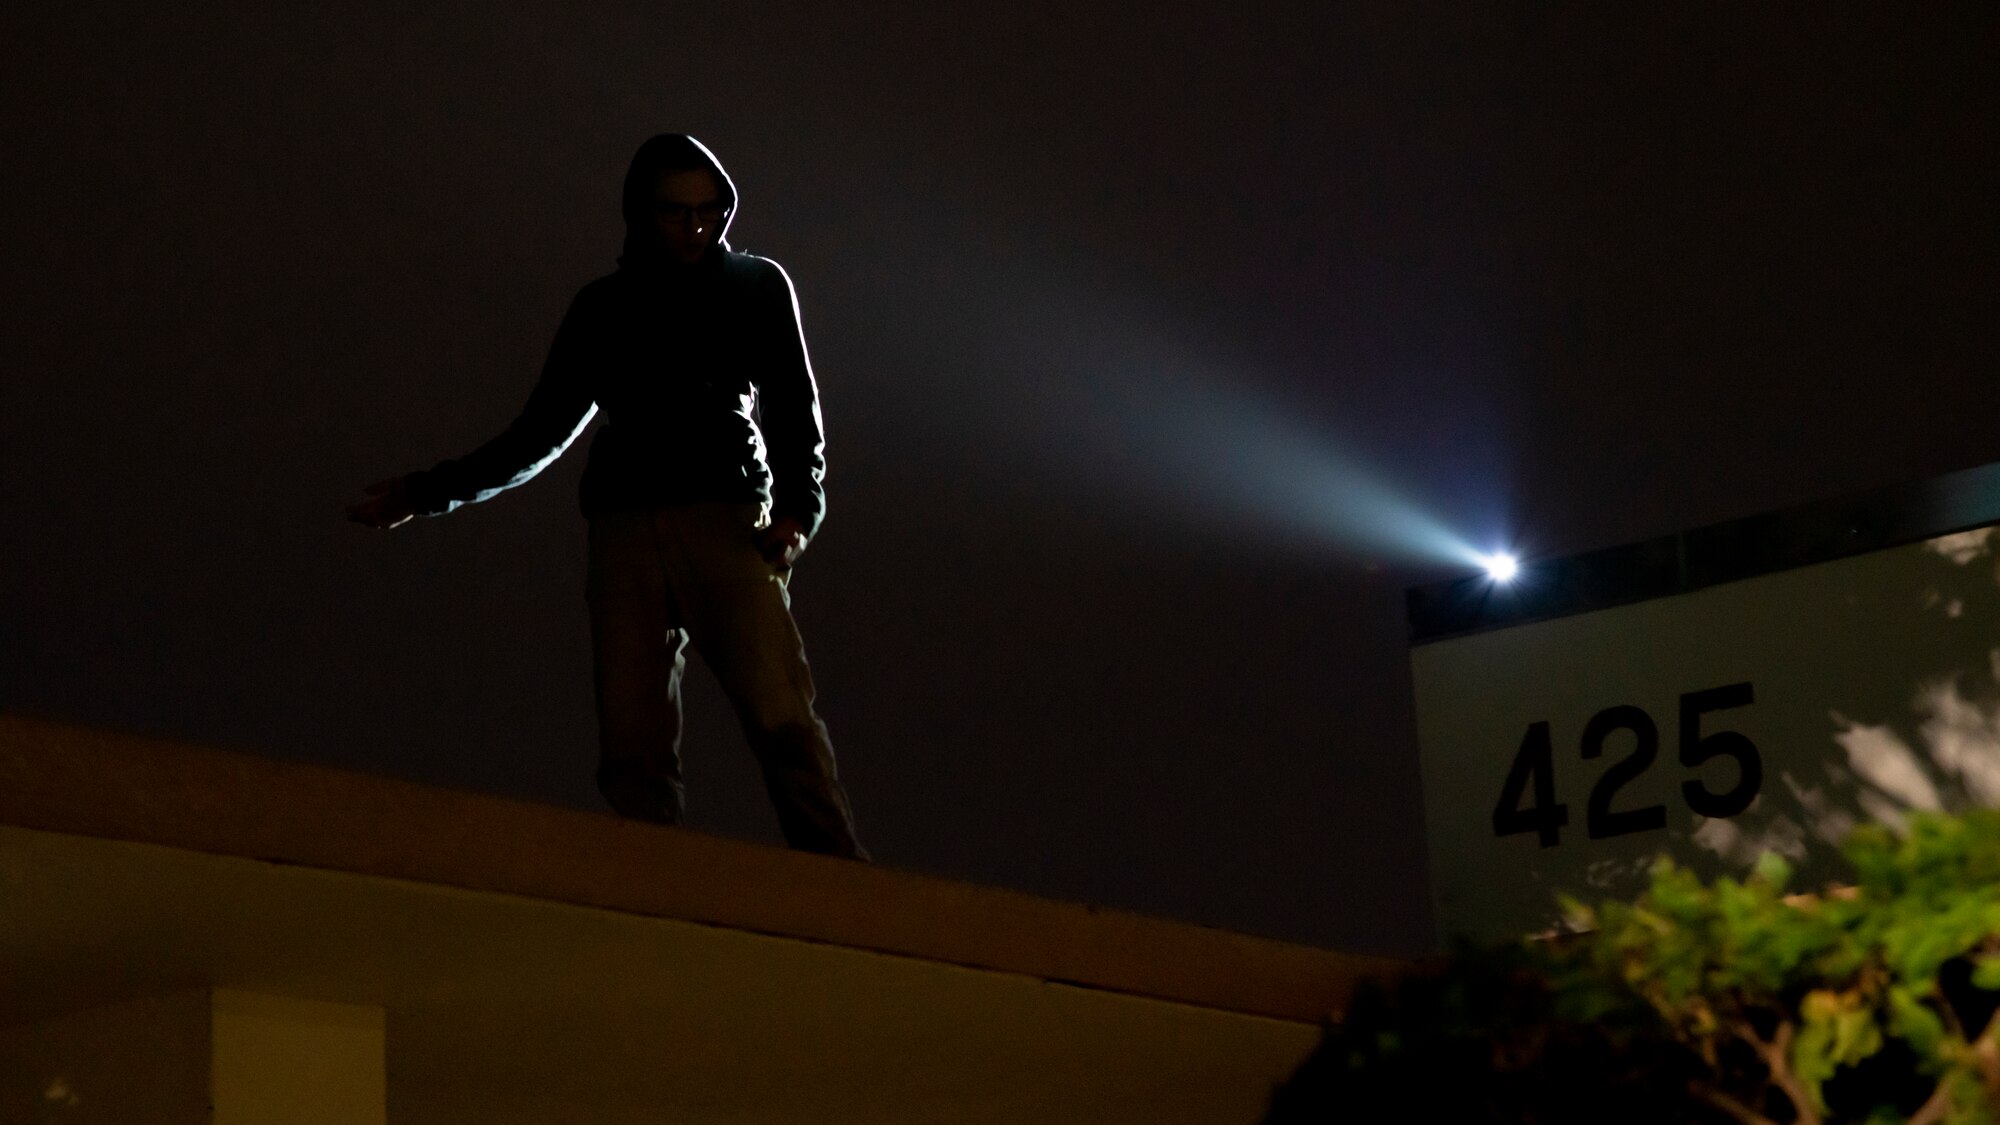 An airman stands atop a building simulating a hostile threat during training